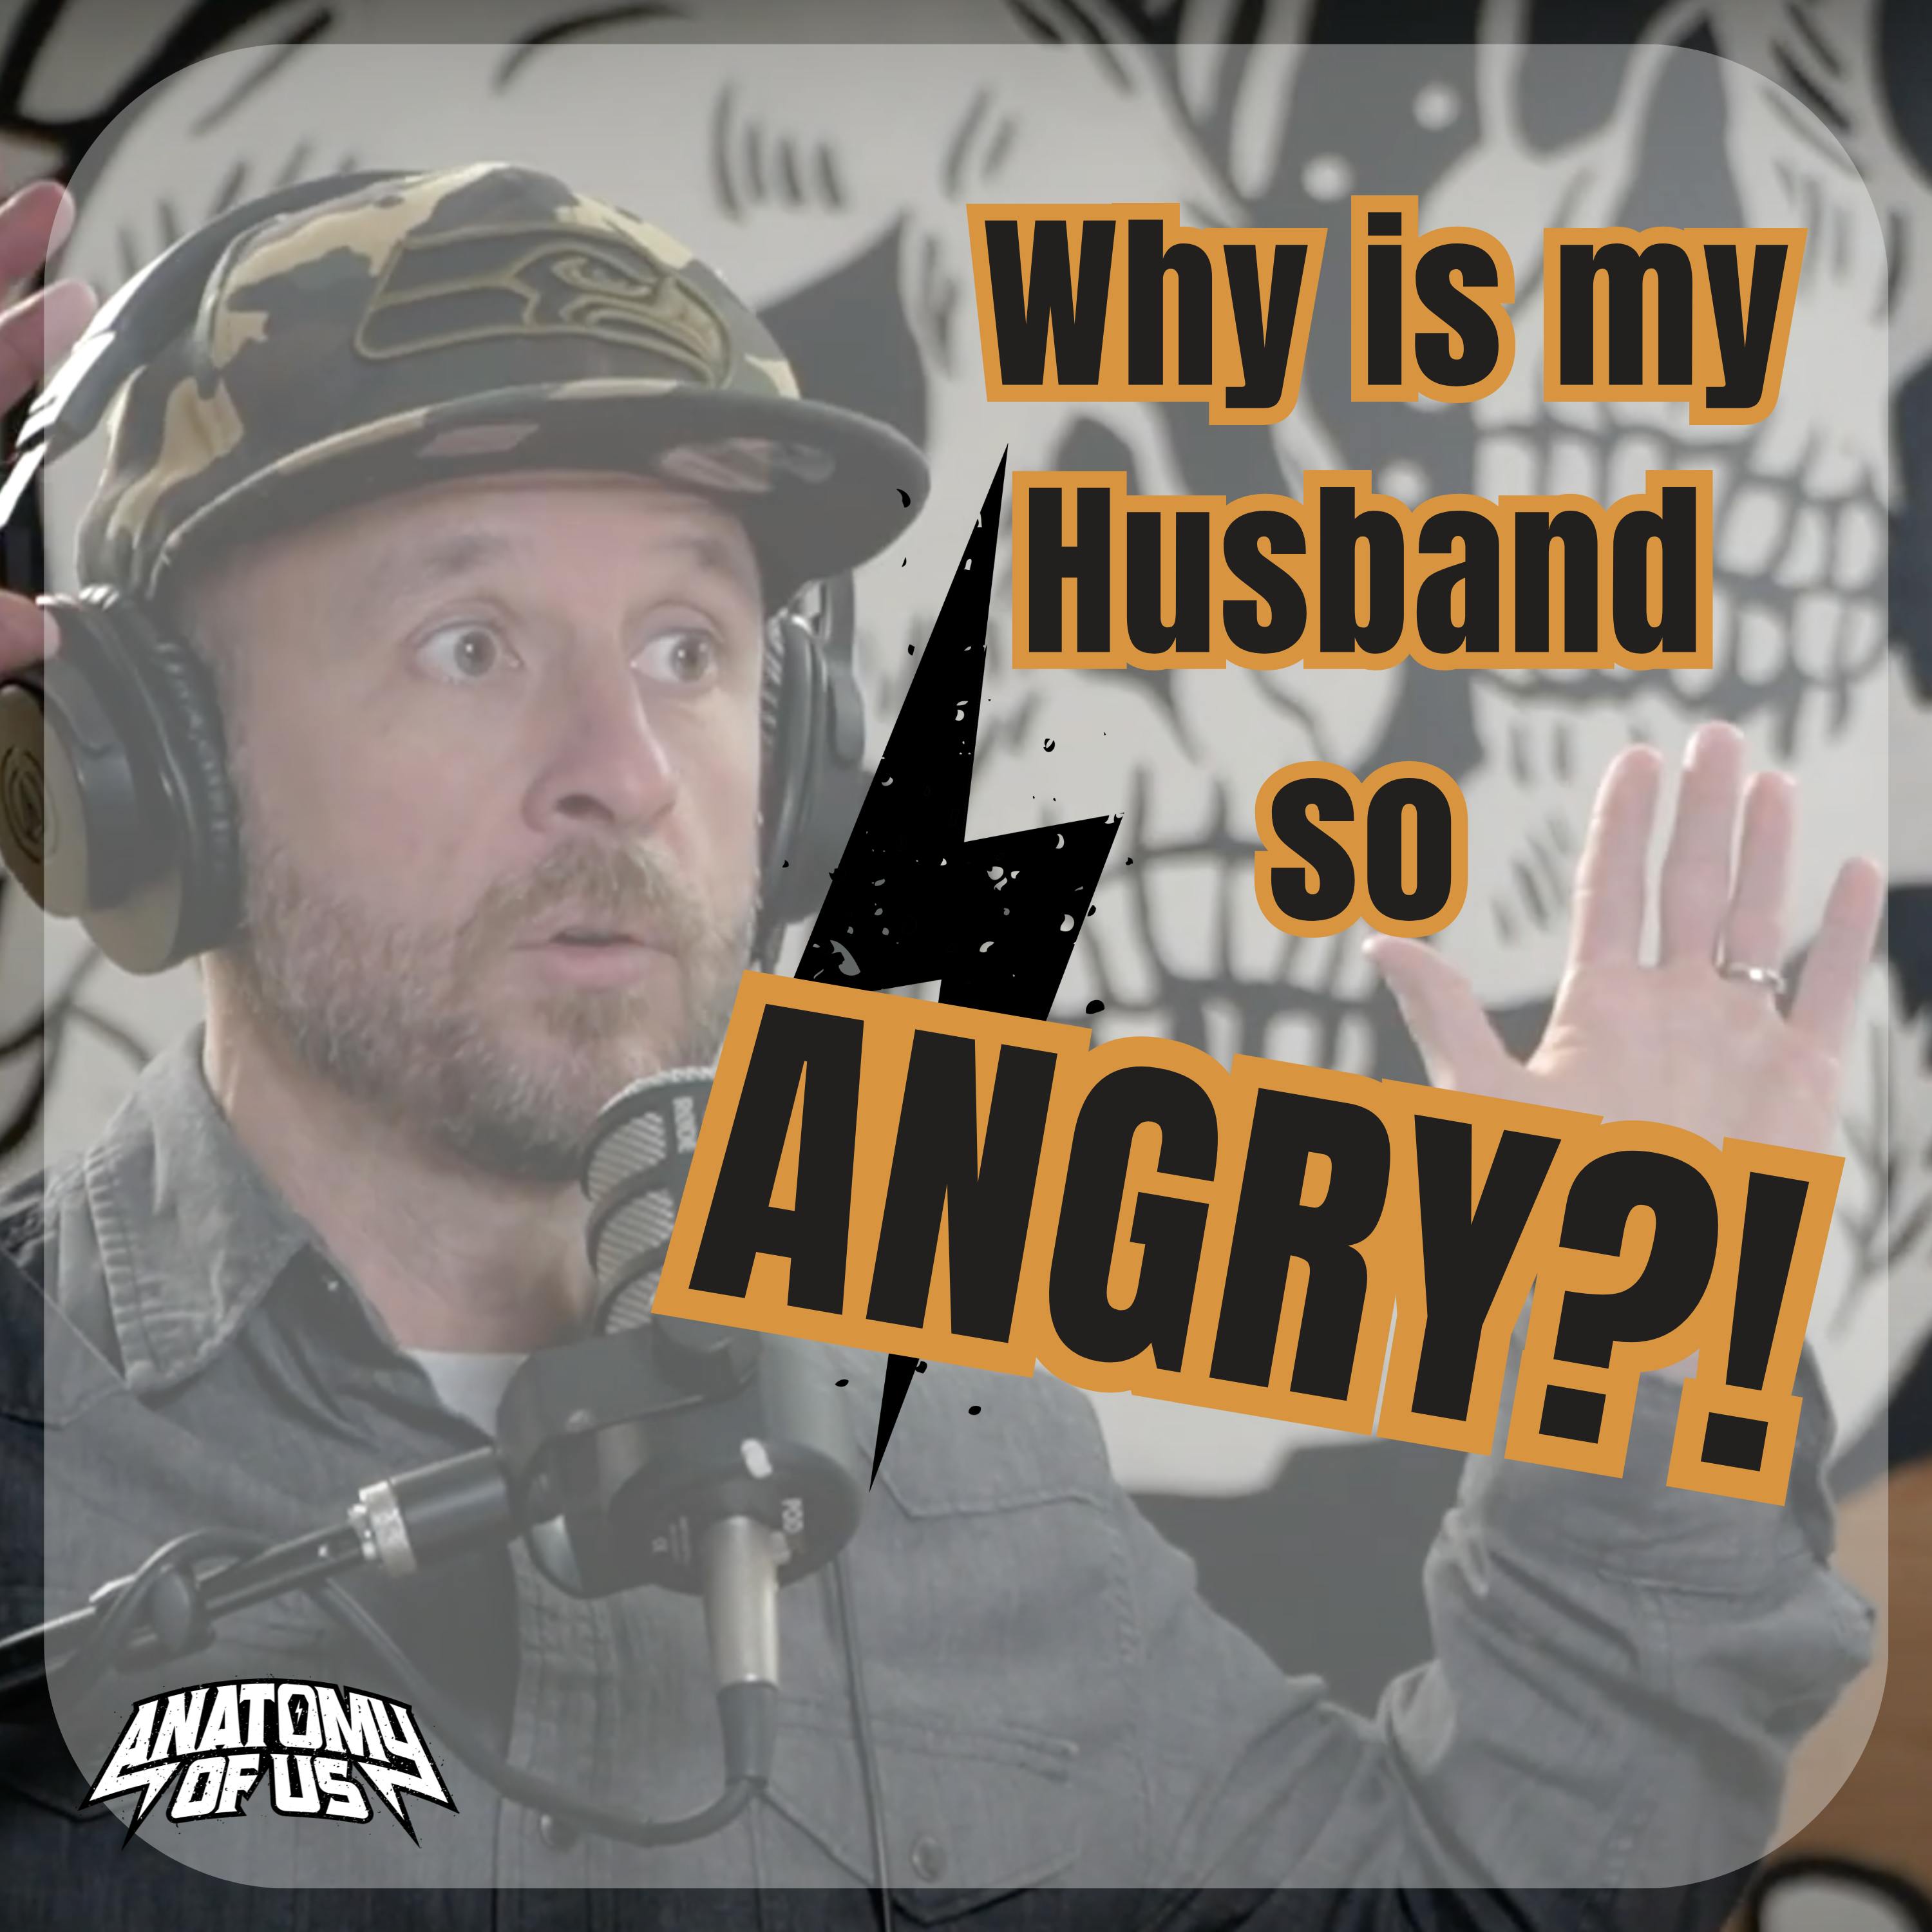 Why is my Husband SO ANGRY?!